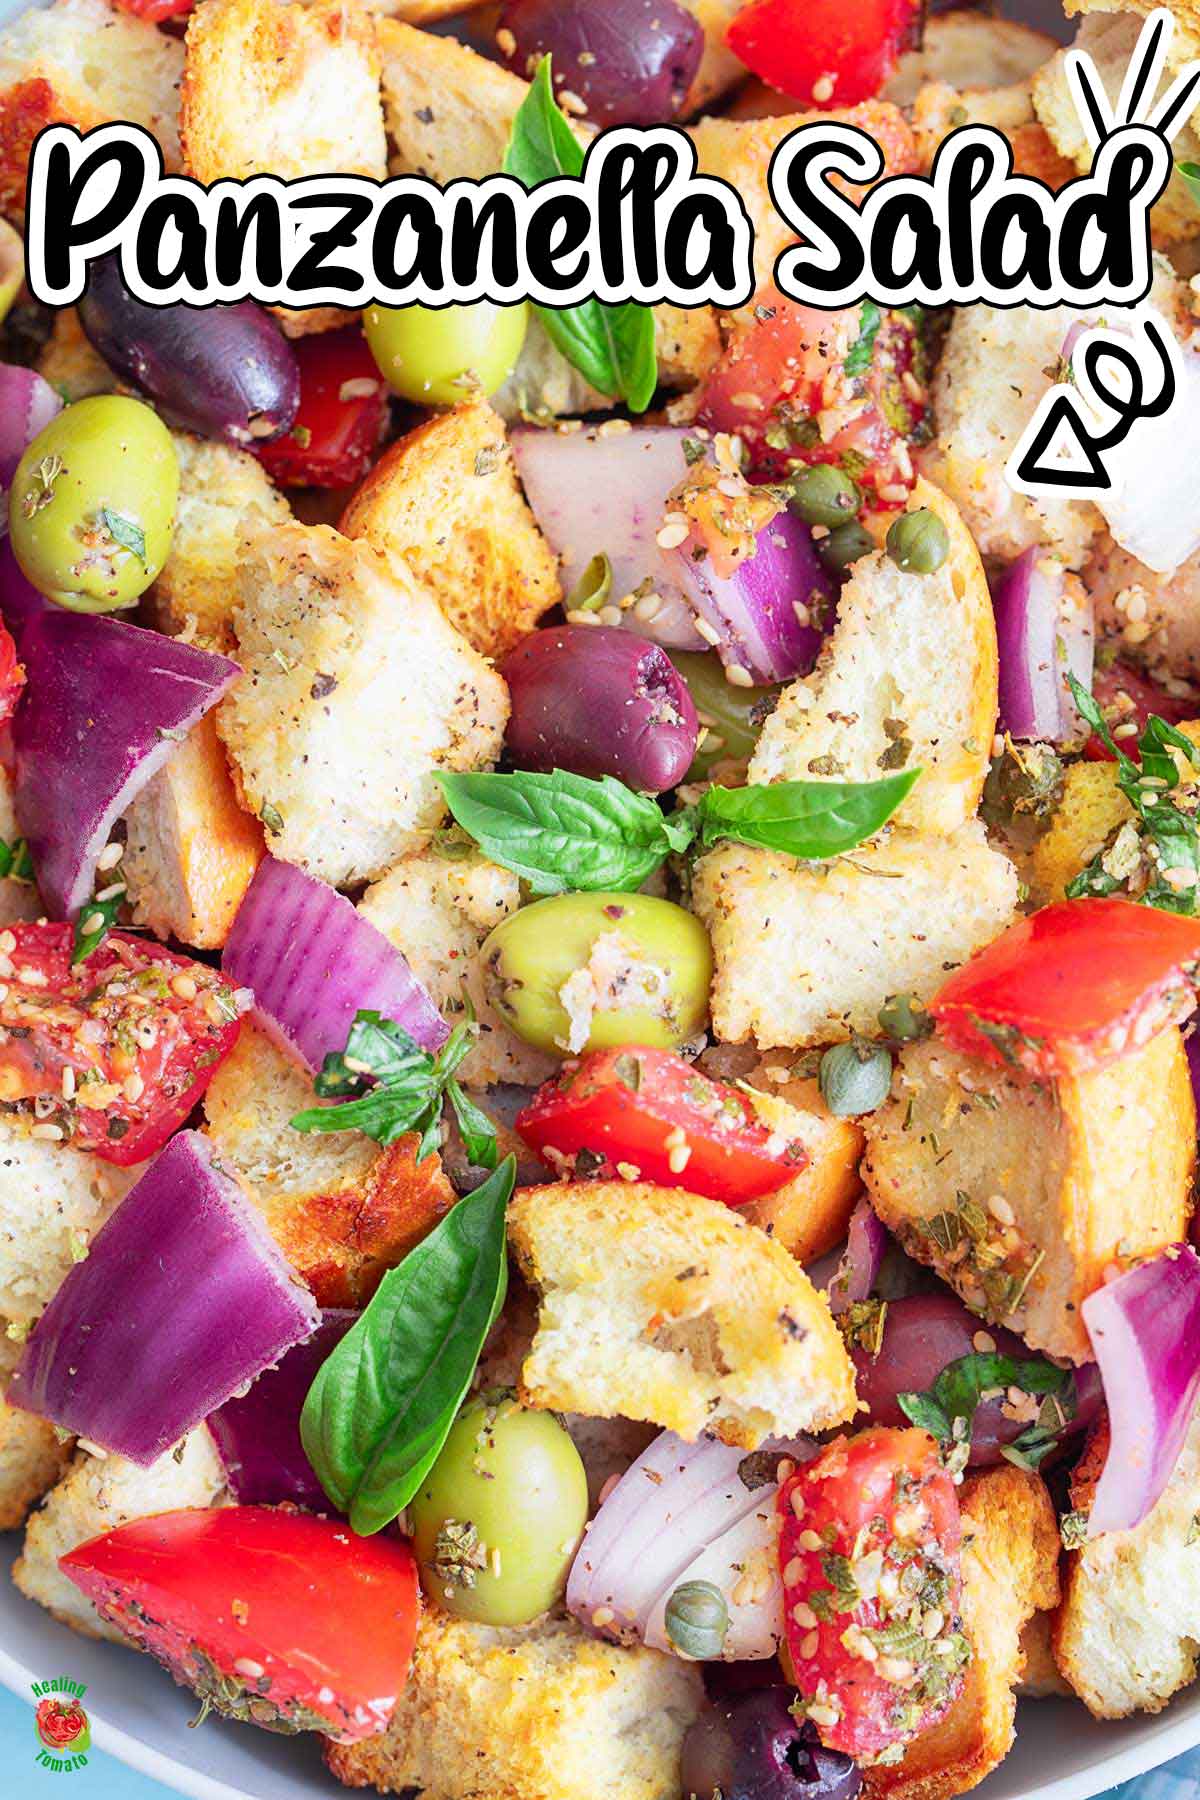 Top and closeup view of panzanella bread salad with olives, tomatoes, bread, onions and capers.